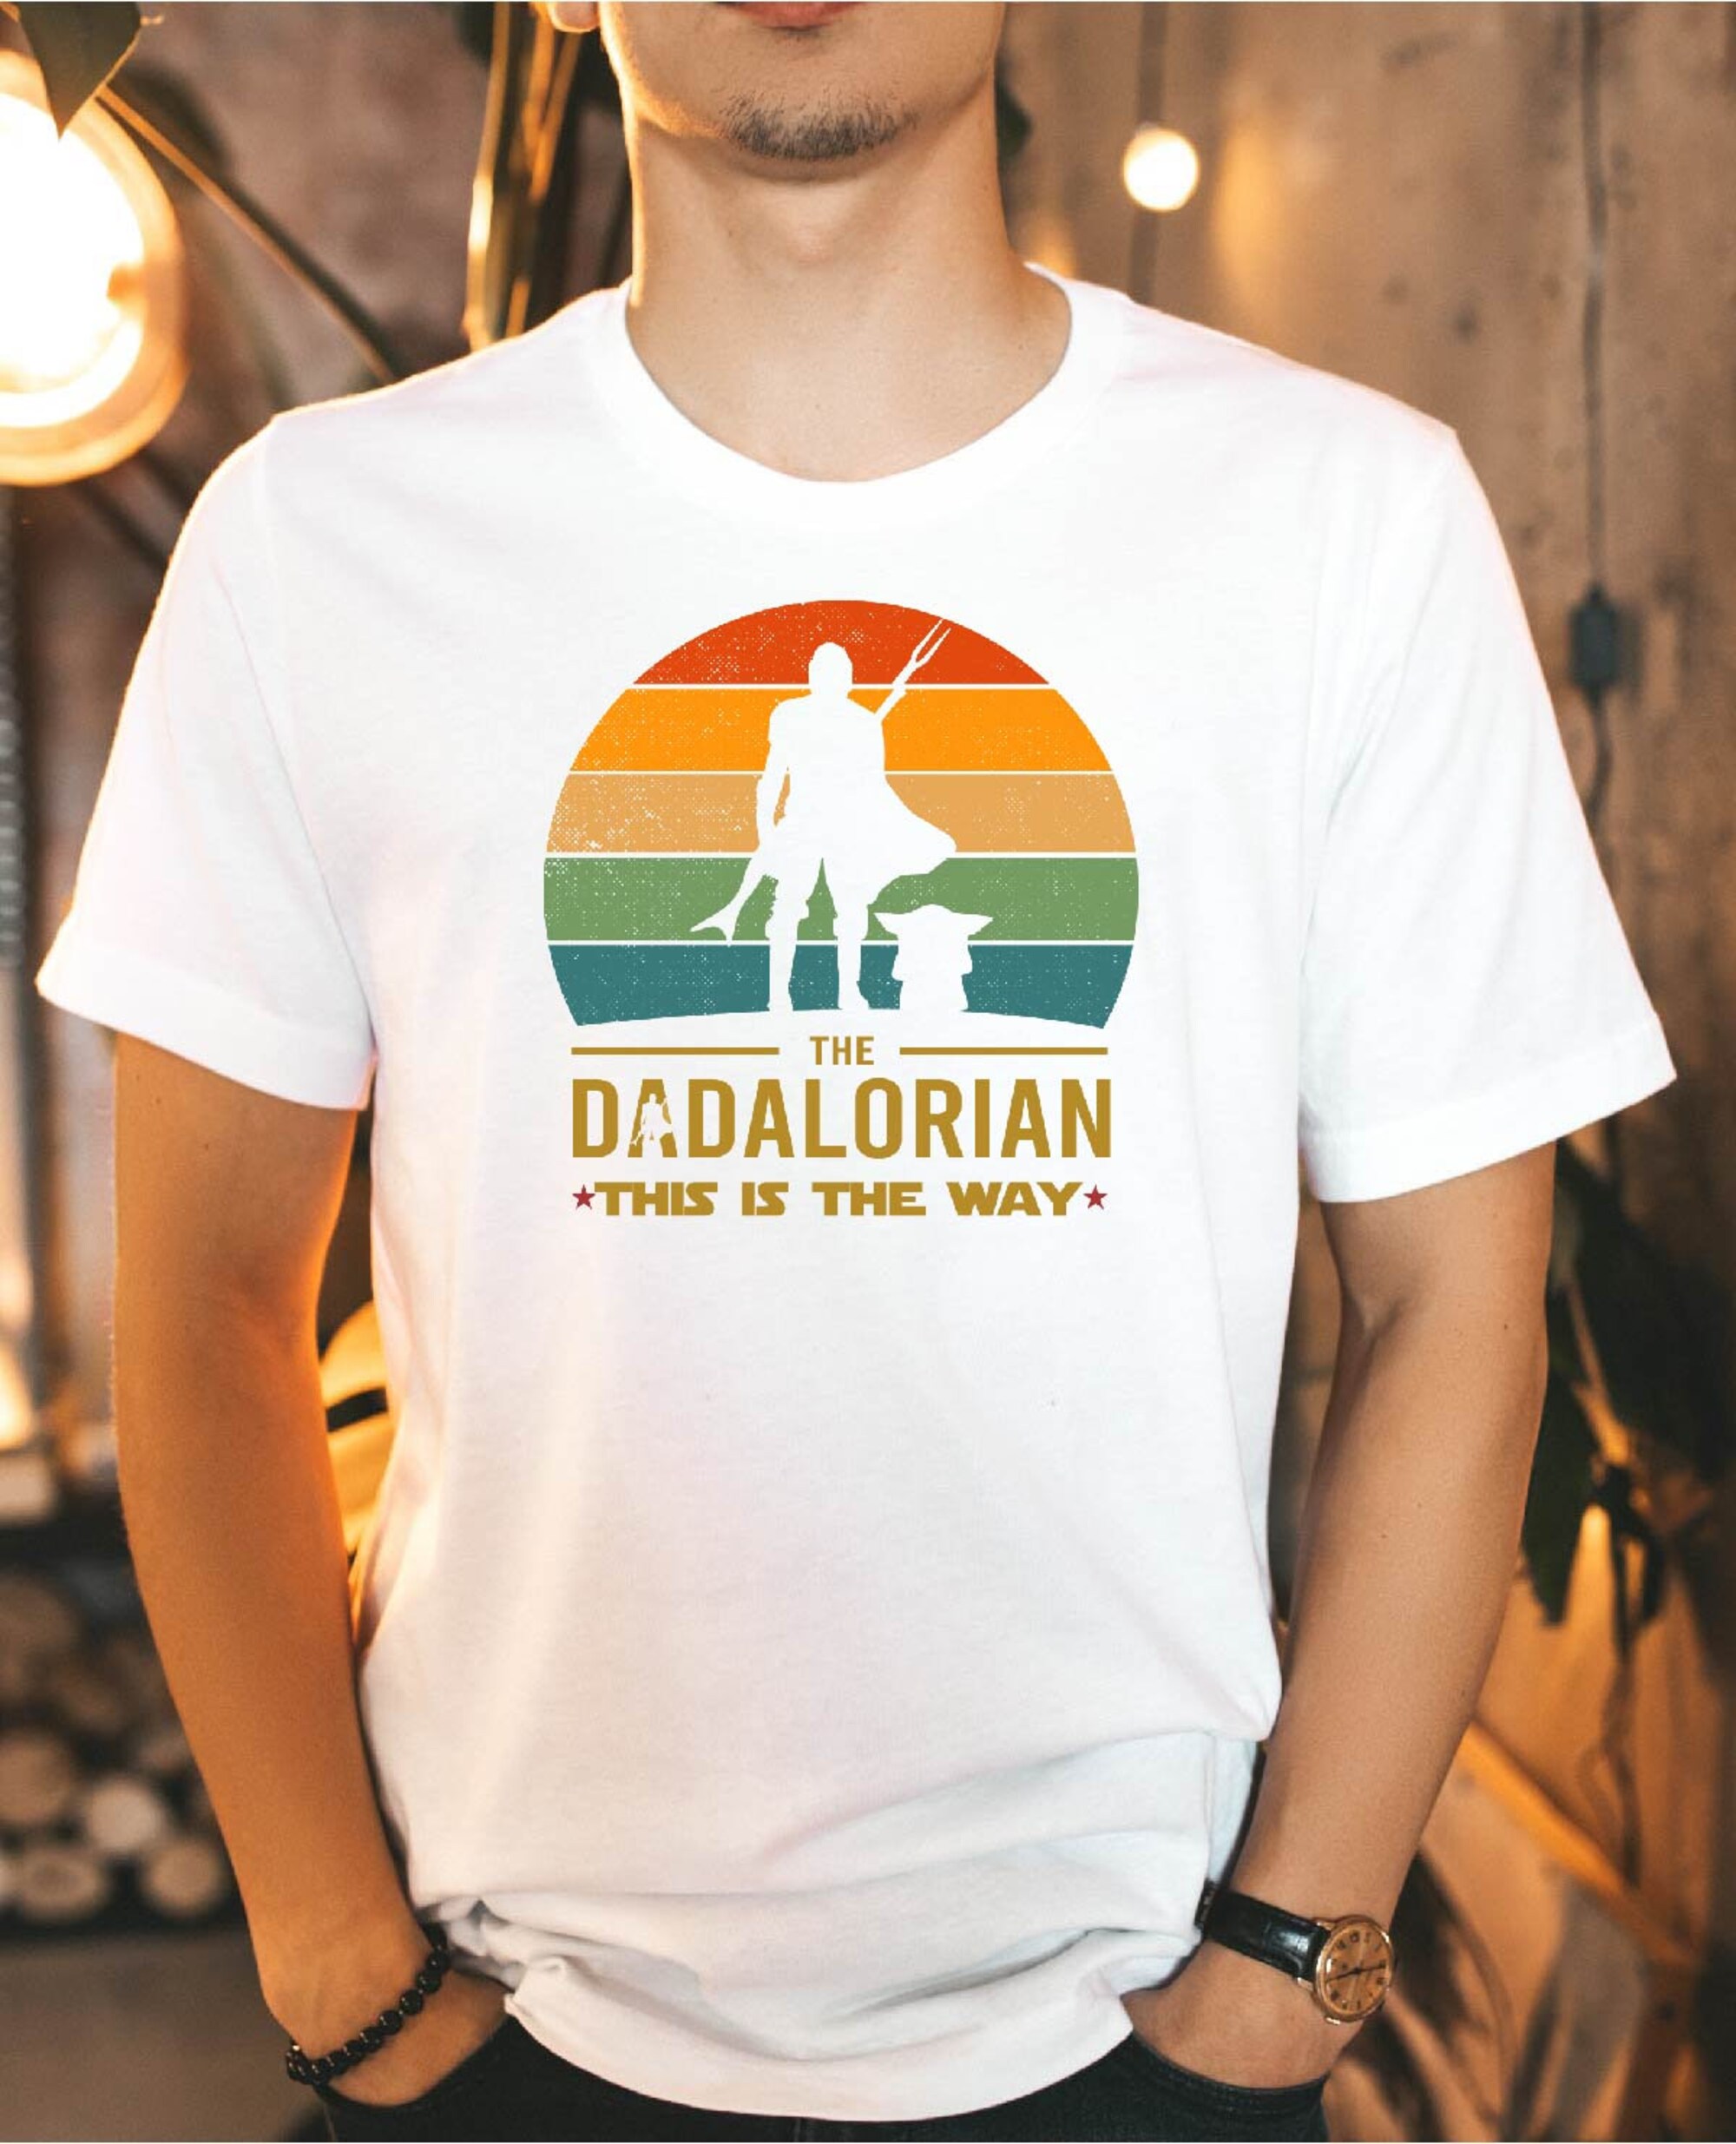 Discover Dadalorian Shirt, Fathers Day Gift, Mandalorian Galaxy T Shirt, Fathers Day Shirt, Funny Gift For Dad, Gift For Father, Shirt For Men